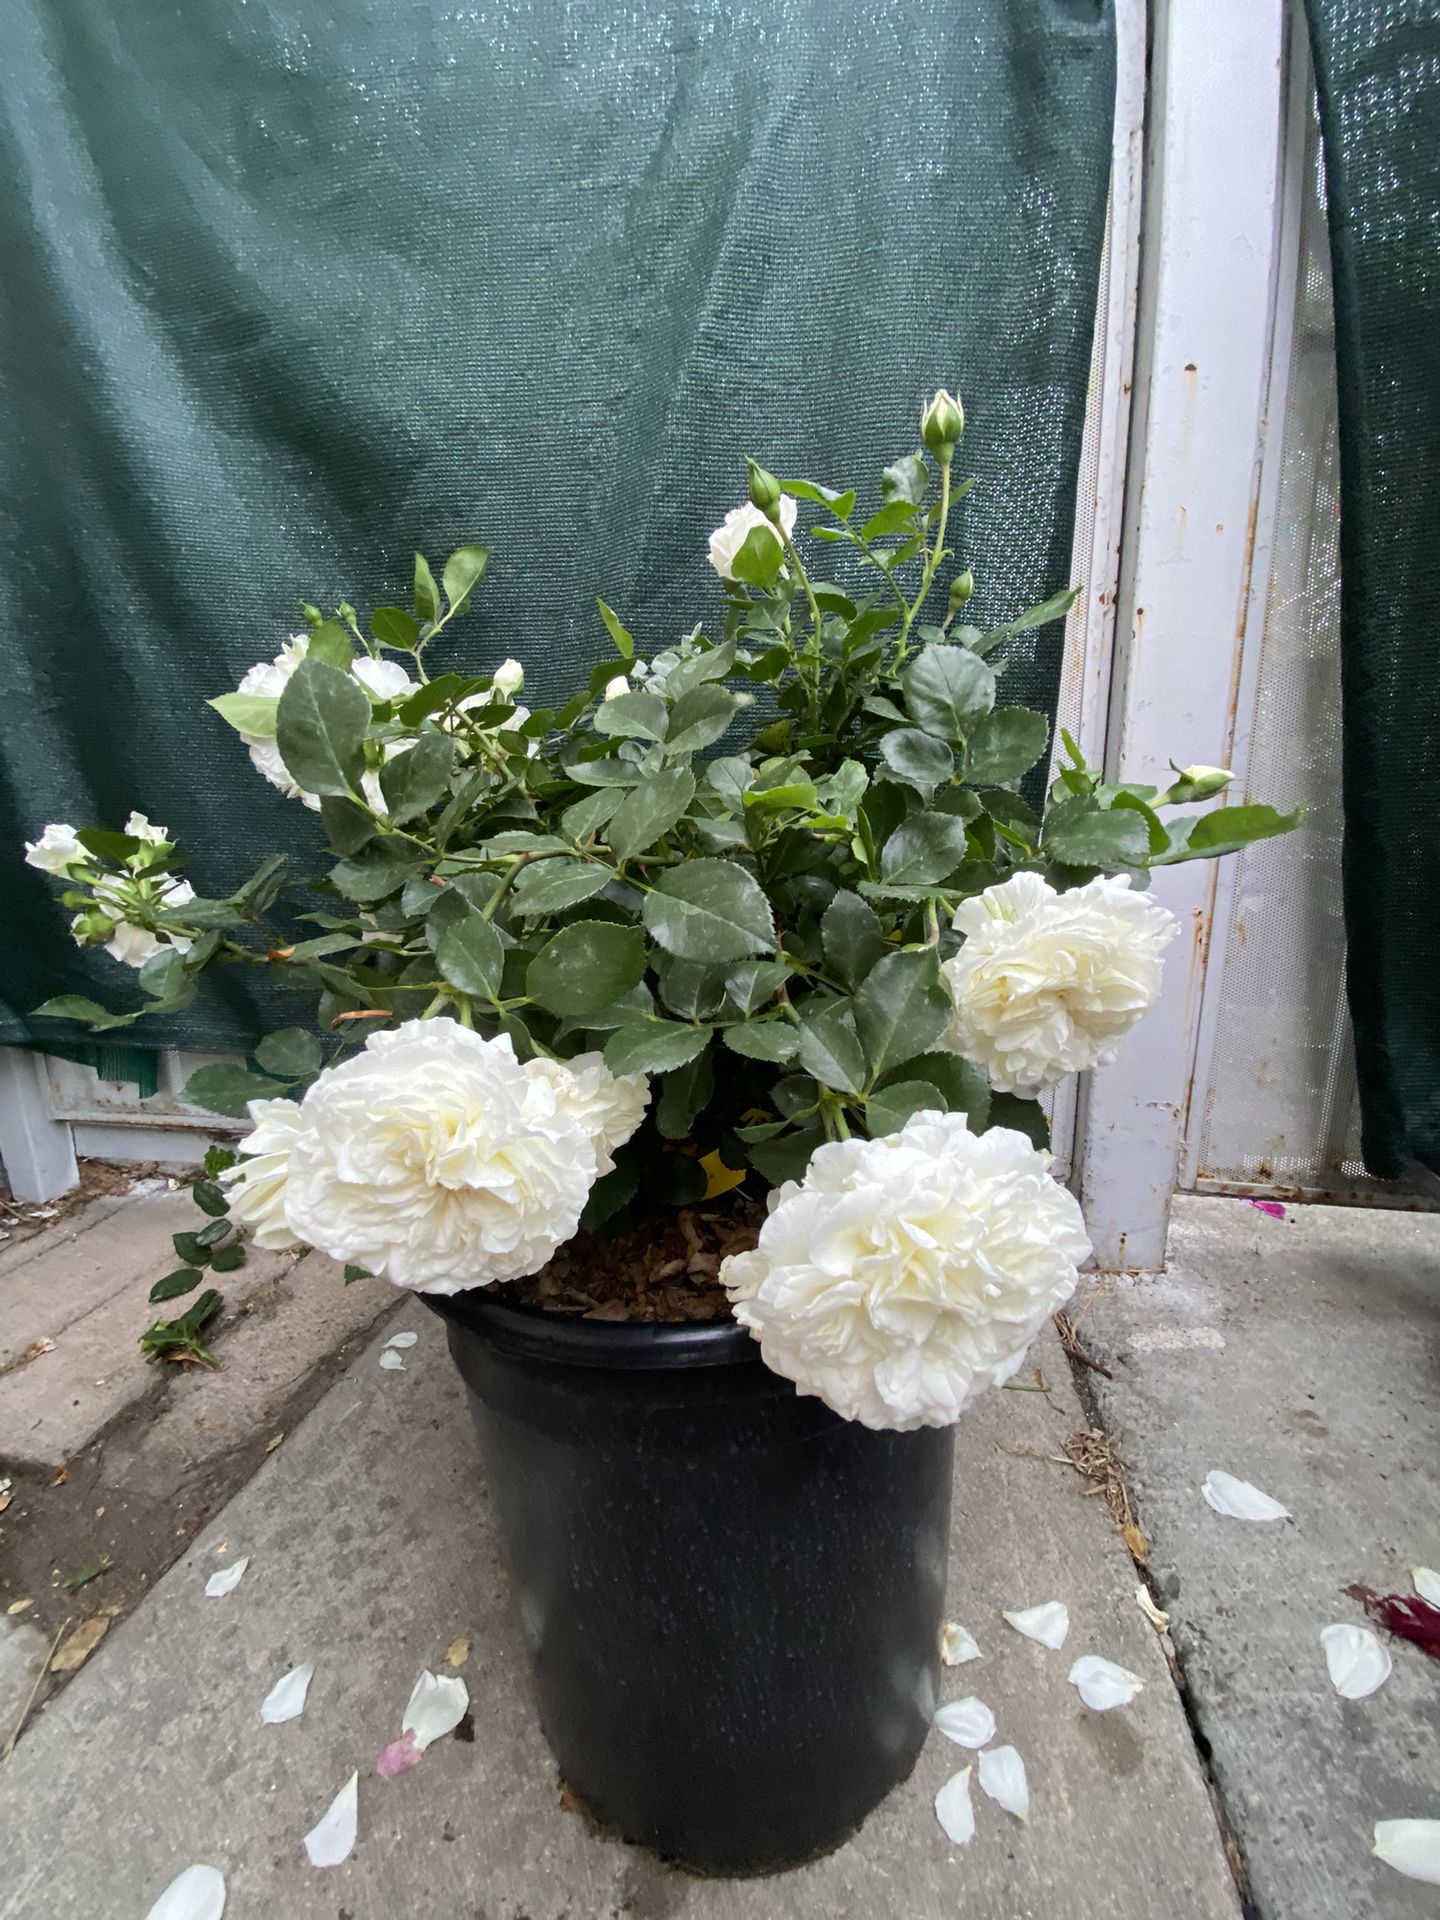 MEIDILAND WHITE ROSE BUSH PLANT, With Flowers . In 5 Gallons Pot Pick Up Only 